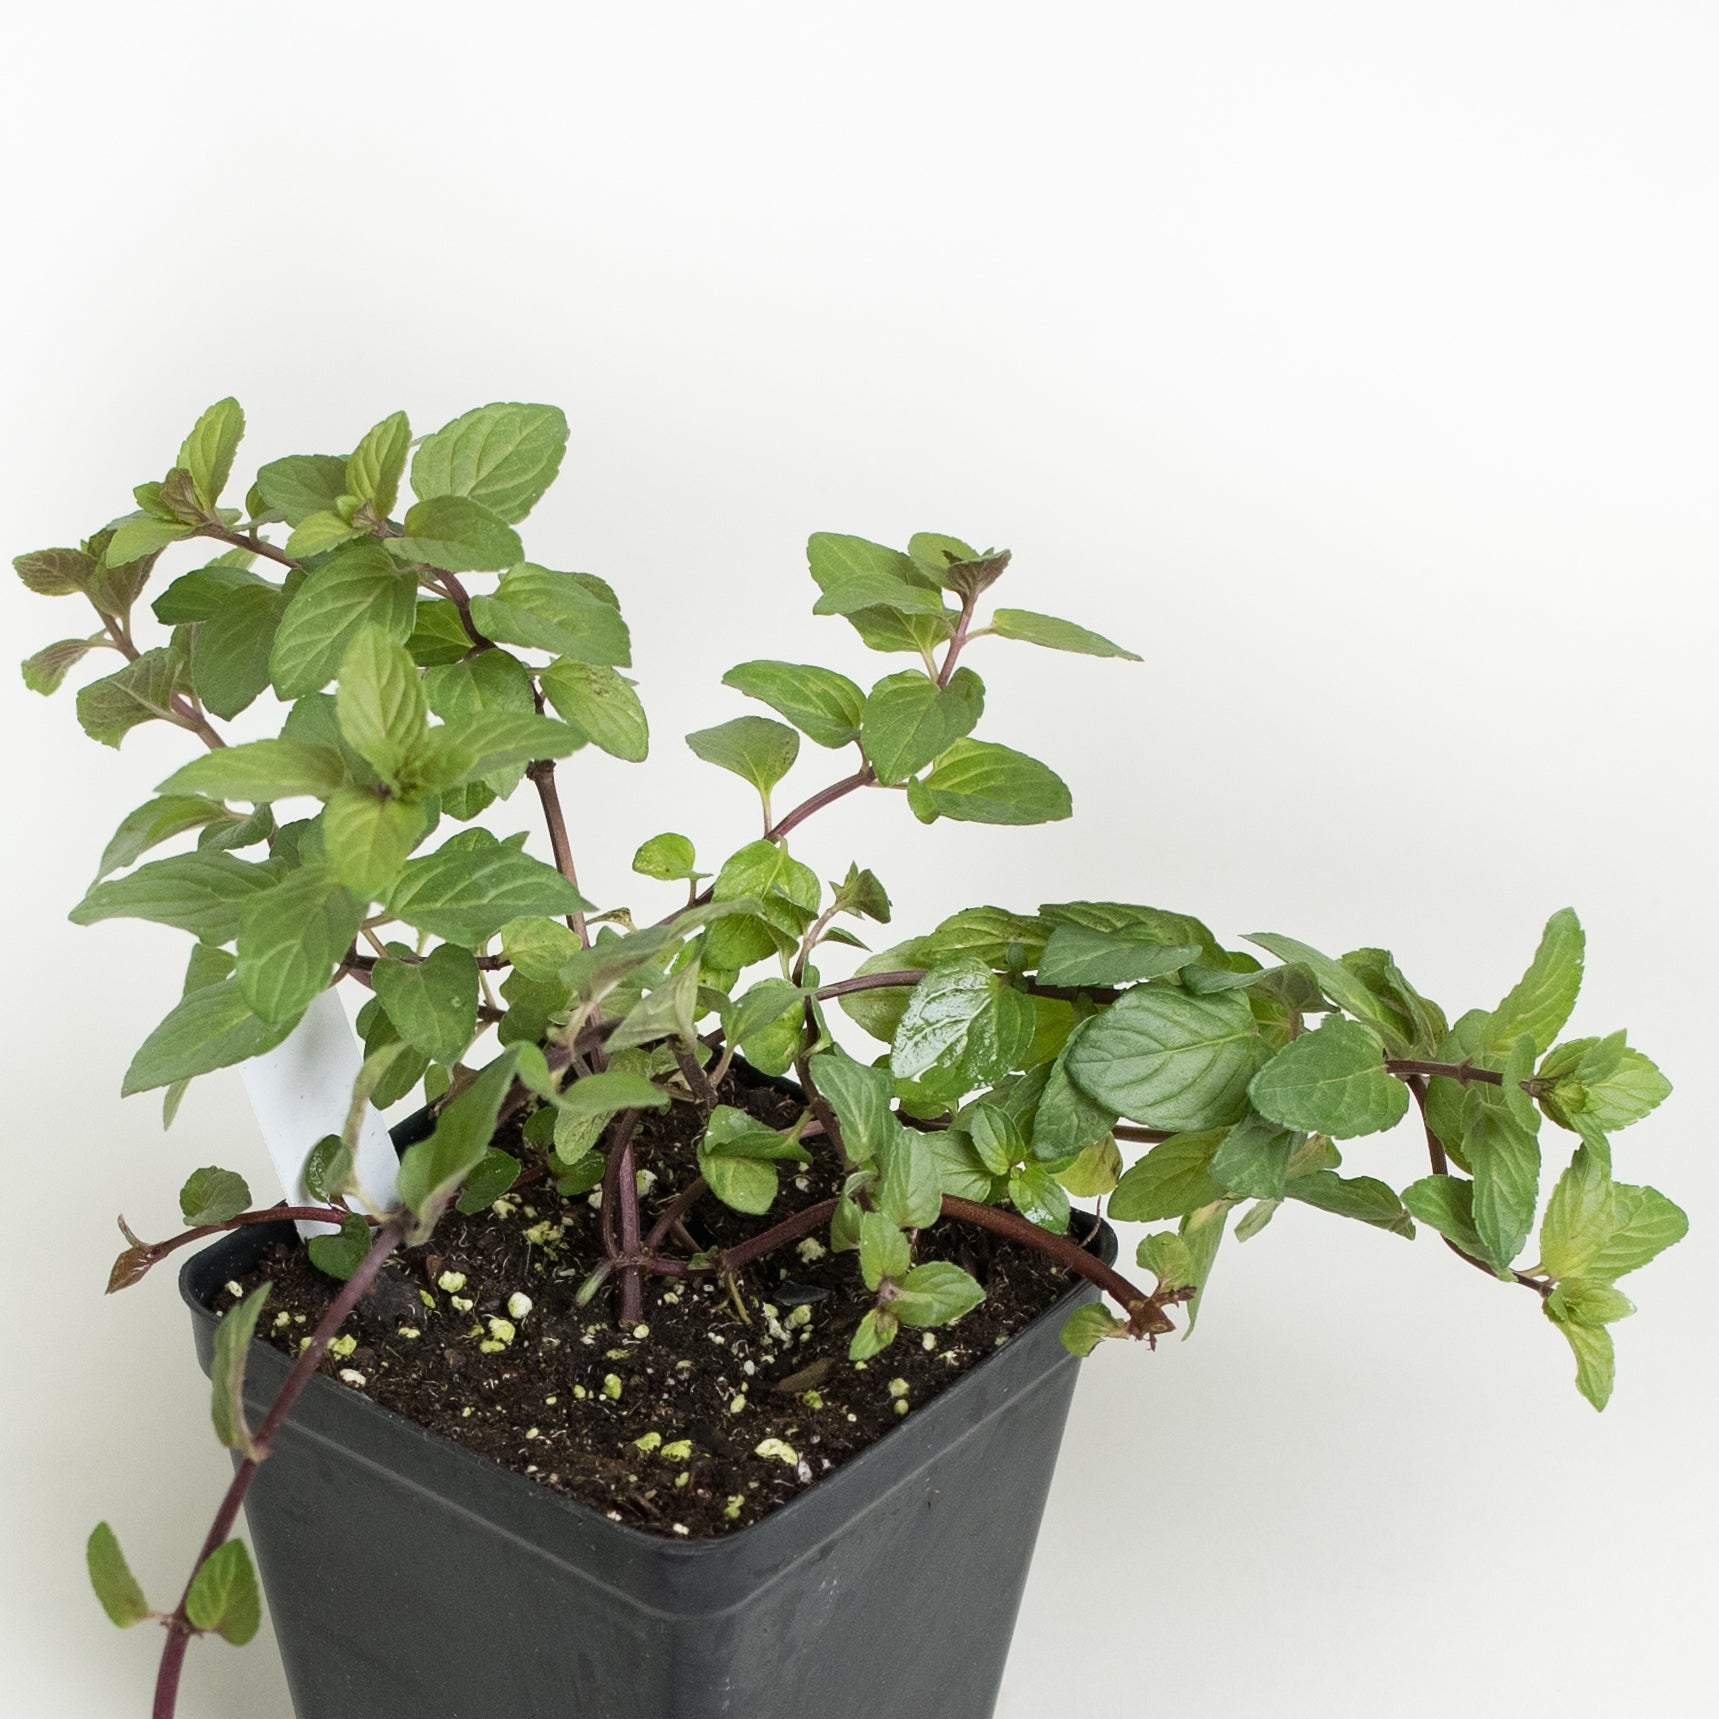 Mint Plants for Sale - Buying & Growing Guide 